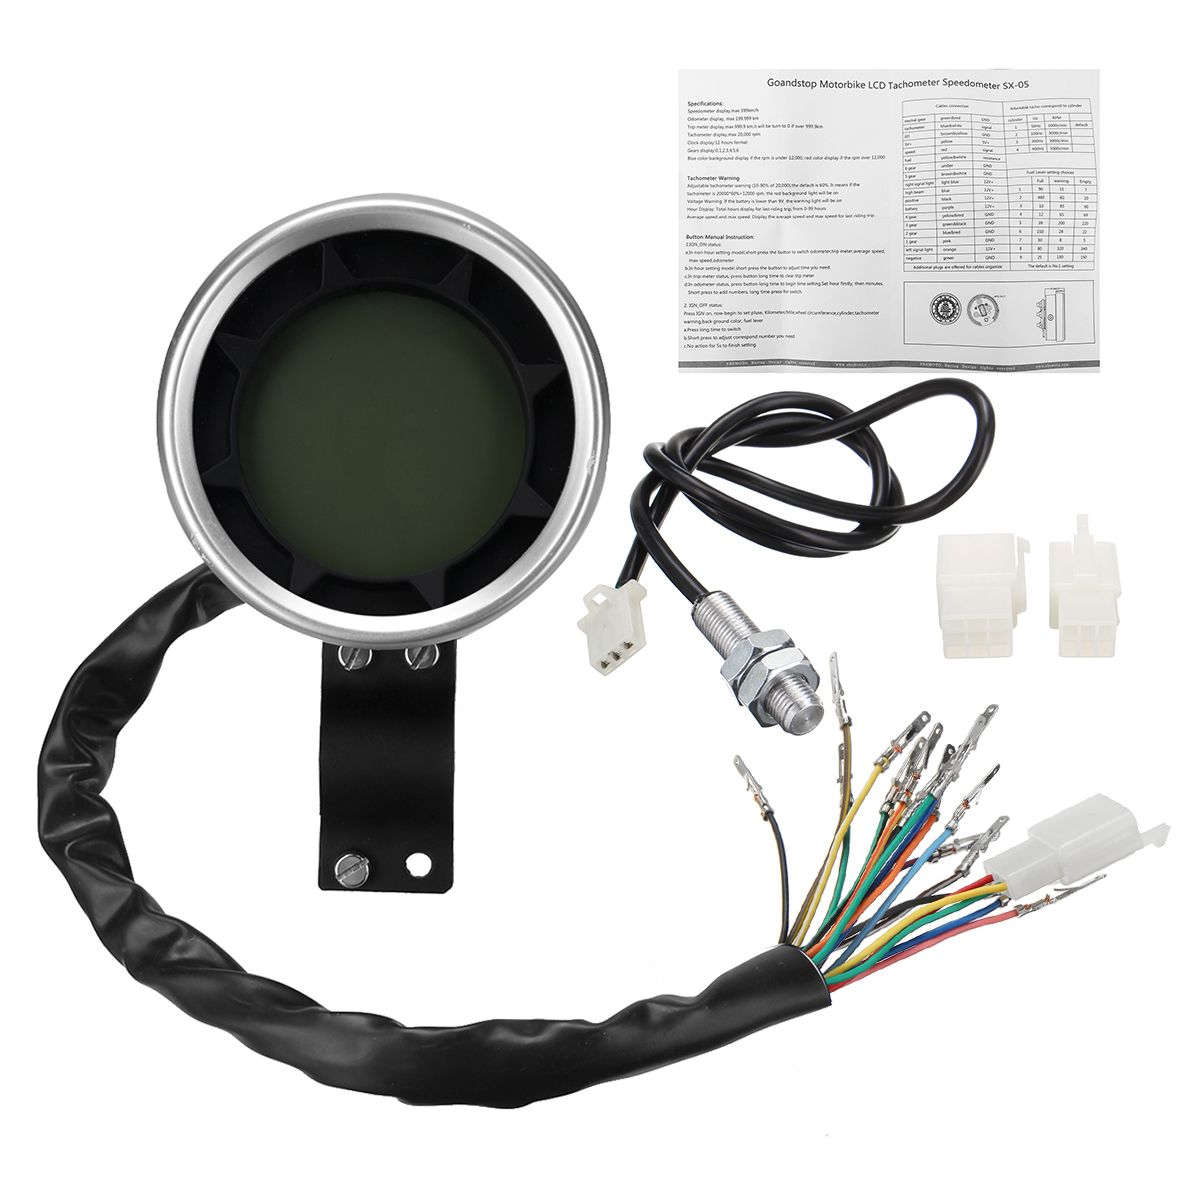 Other Parts & Accessories - 20000RPM Motorcycle Digital ...